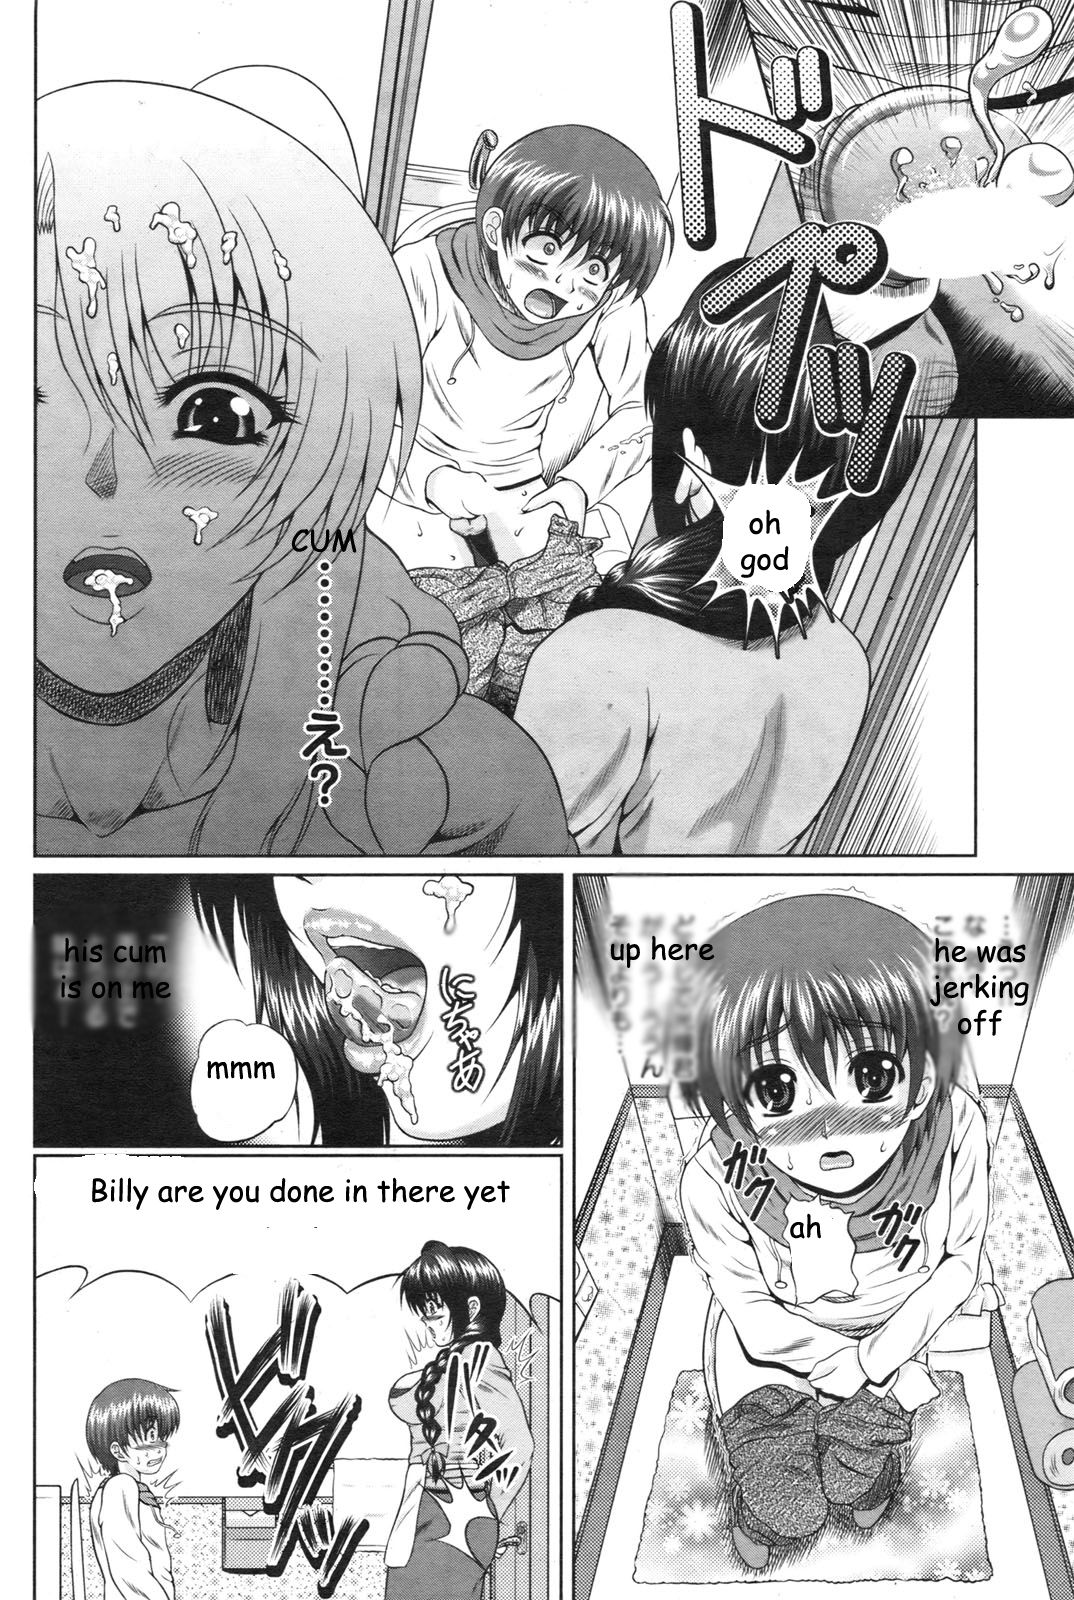 Caught by a Milf (rewrite) [ENG] 